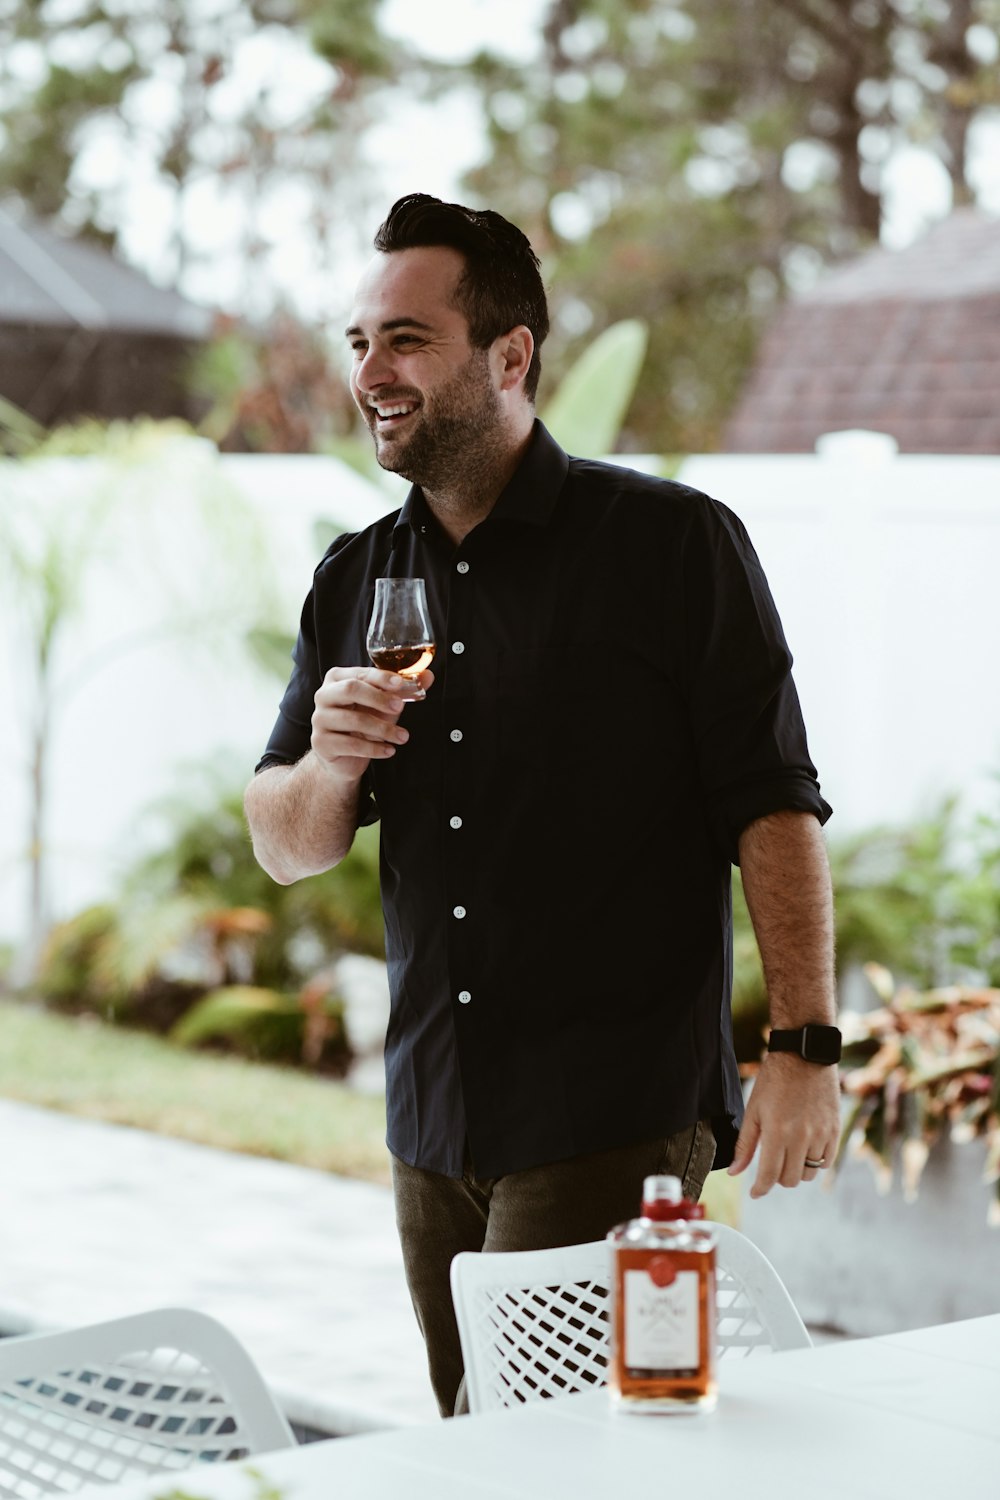 a man holding a glass of wine standing next to a table